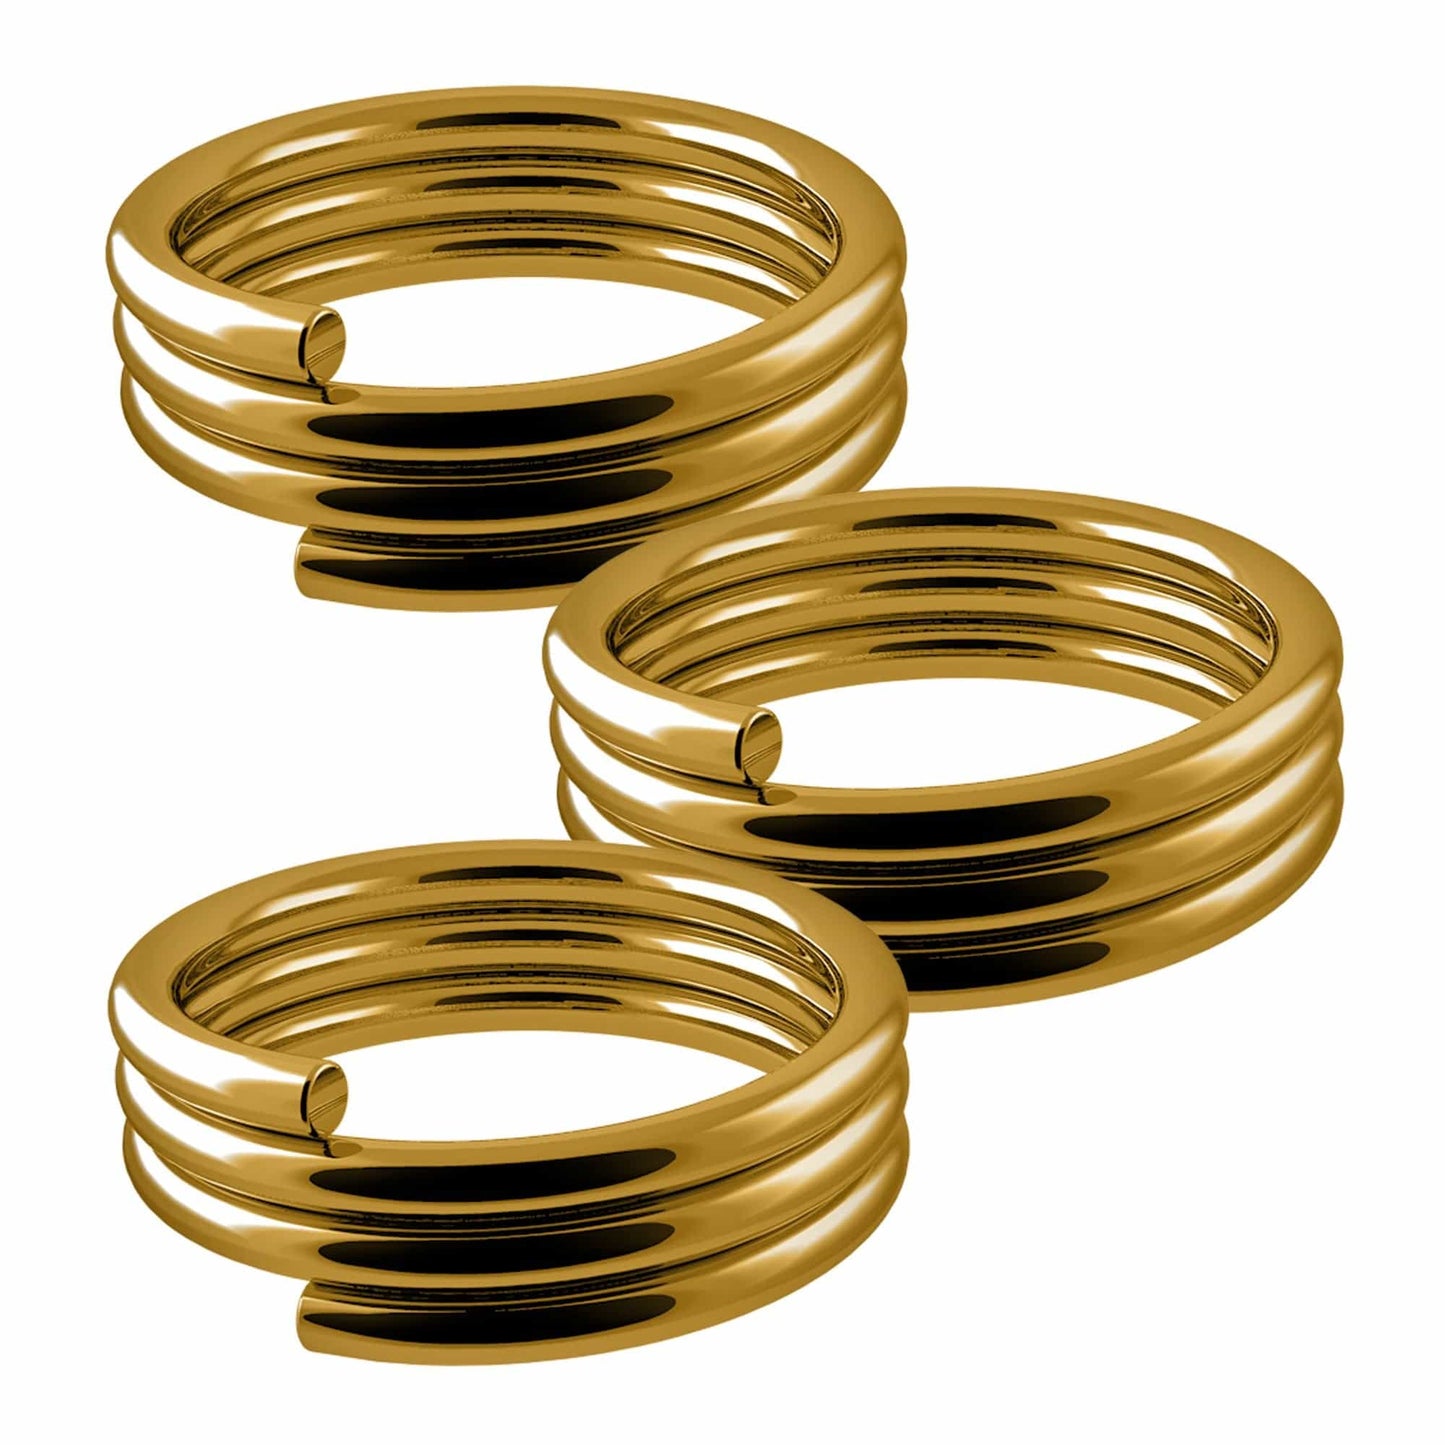 Designa Springs - for use with Nylon Shafts - 10 Sets (30) Gold